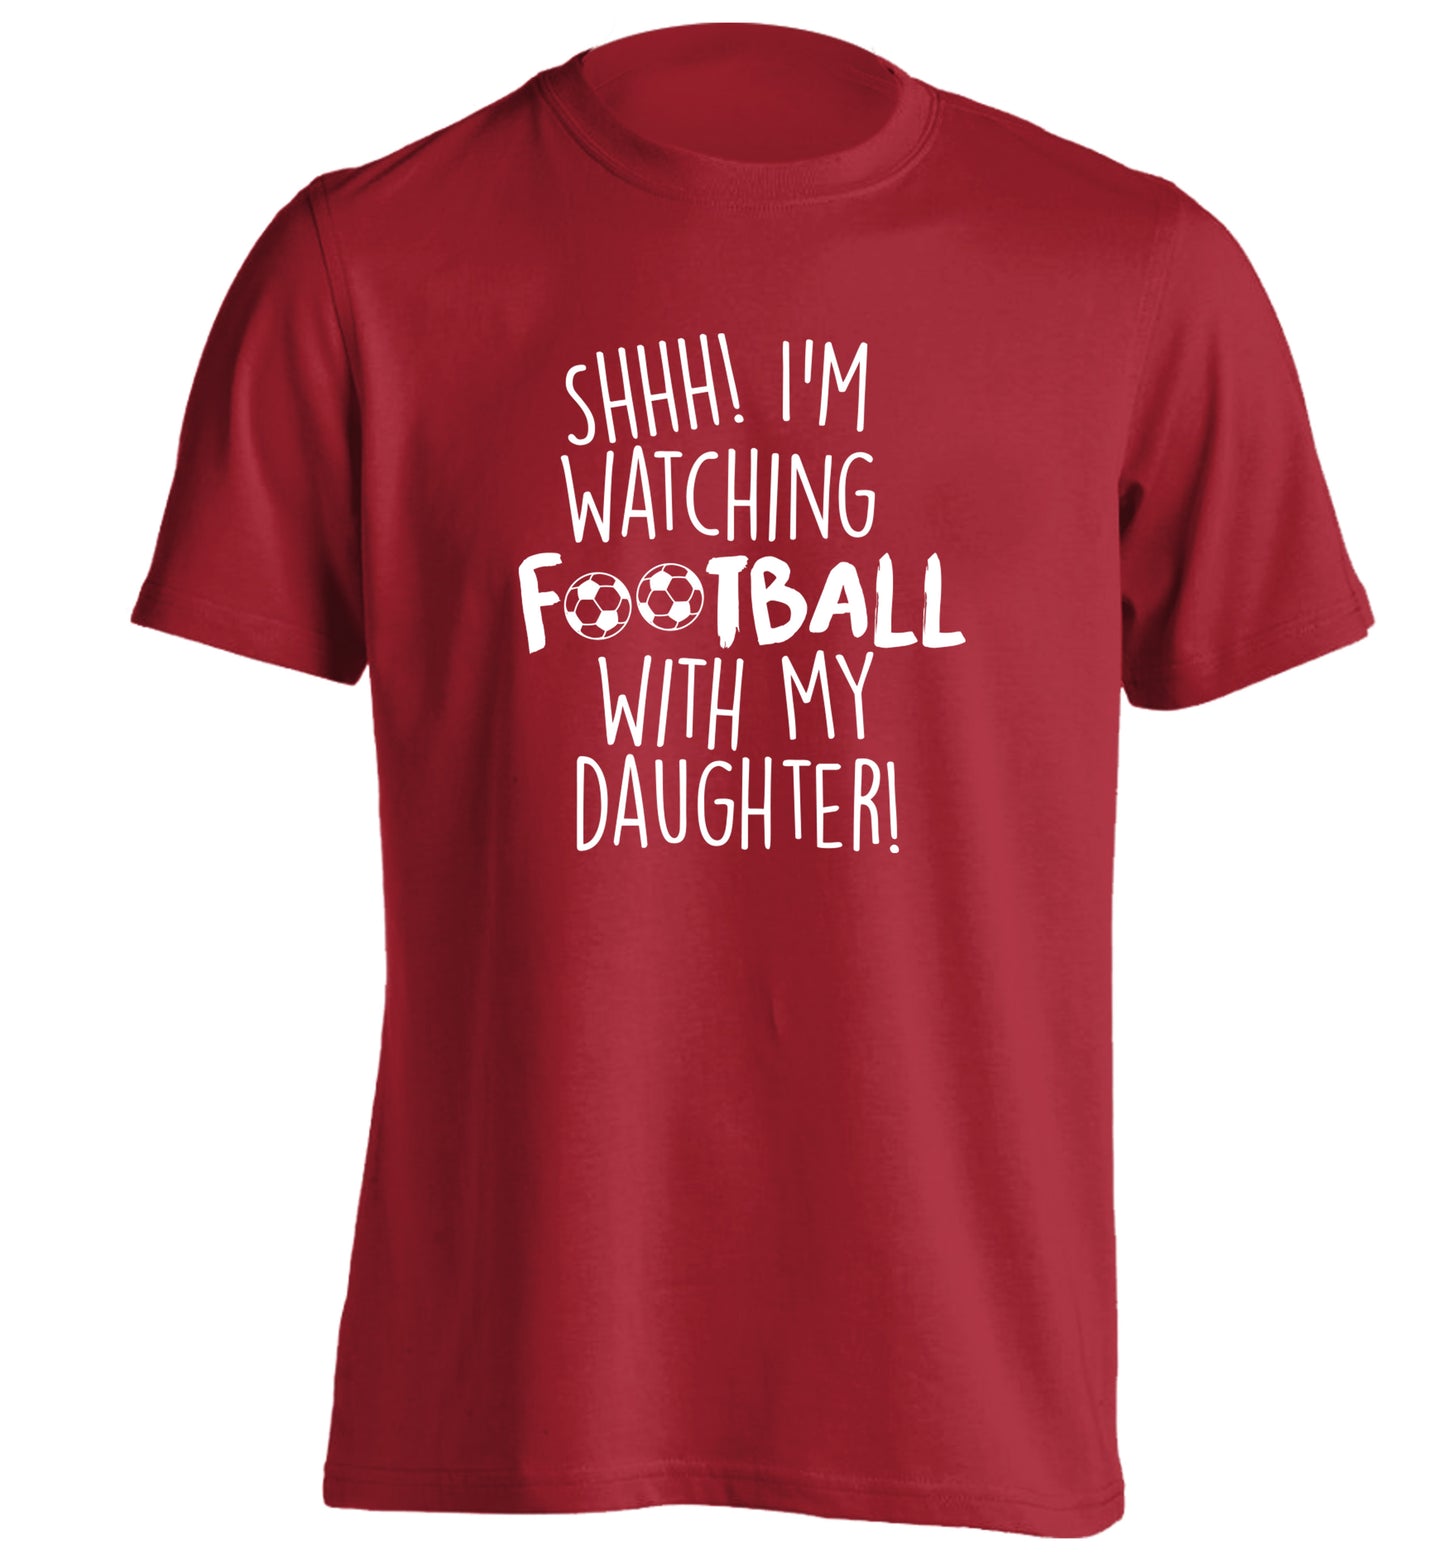 Shhh I'm watching football with my daughter adults unisexred Tshirt 2XL